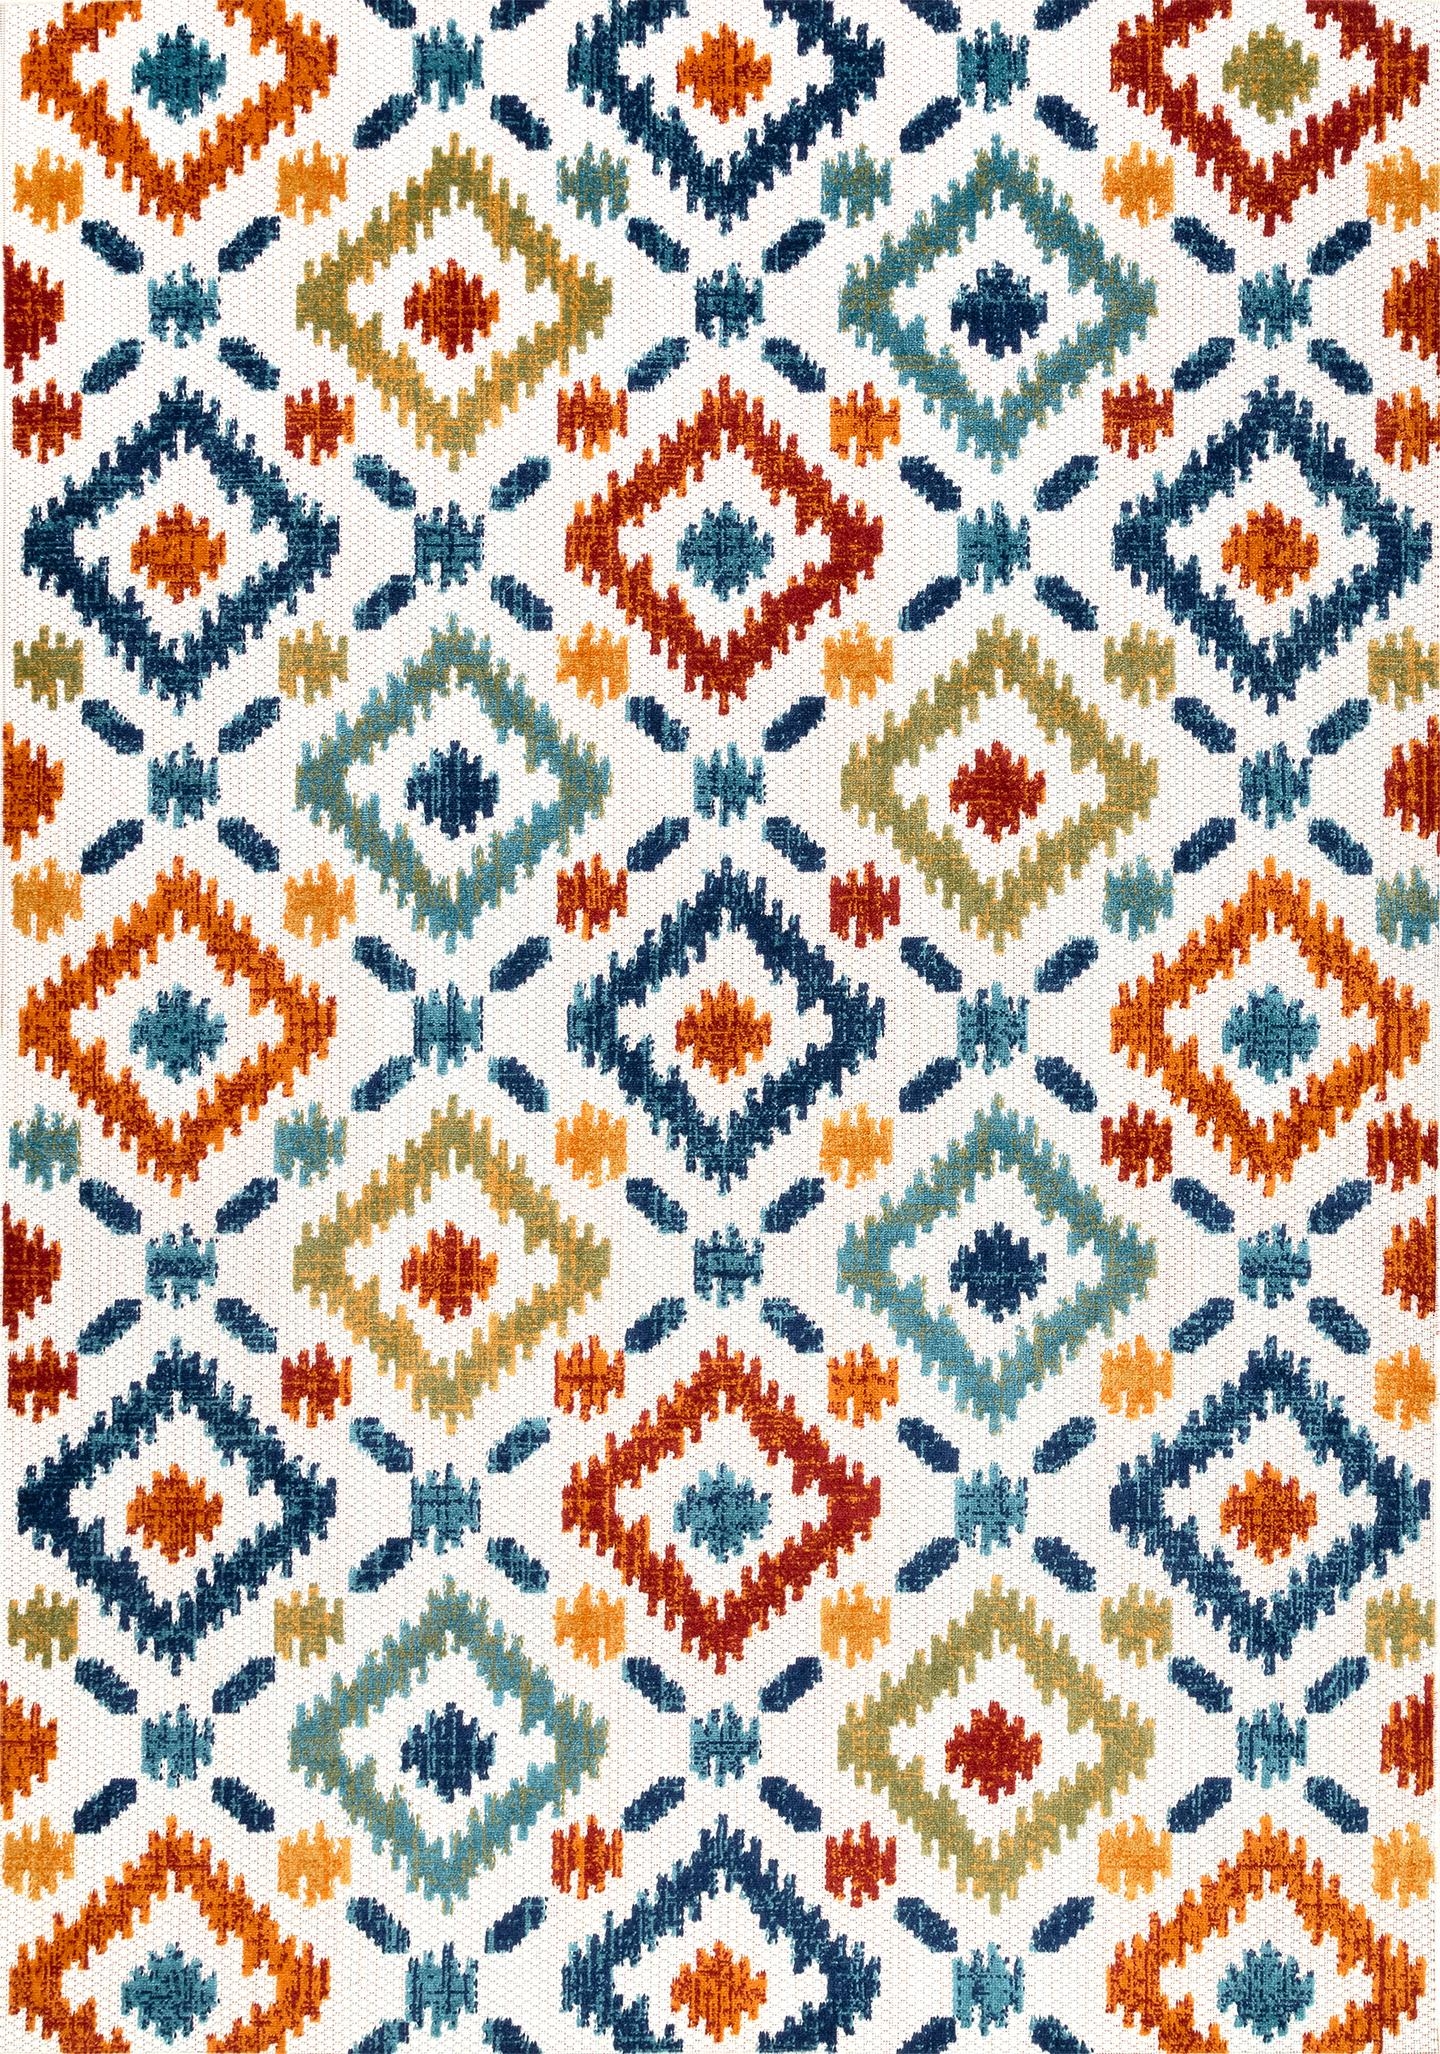  Indoor/Outdoor Transitional Labyrinth Area Rug - Image 1